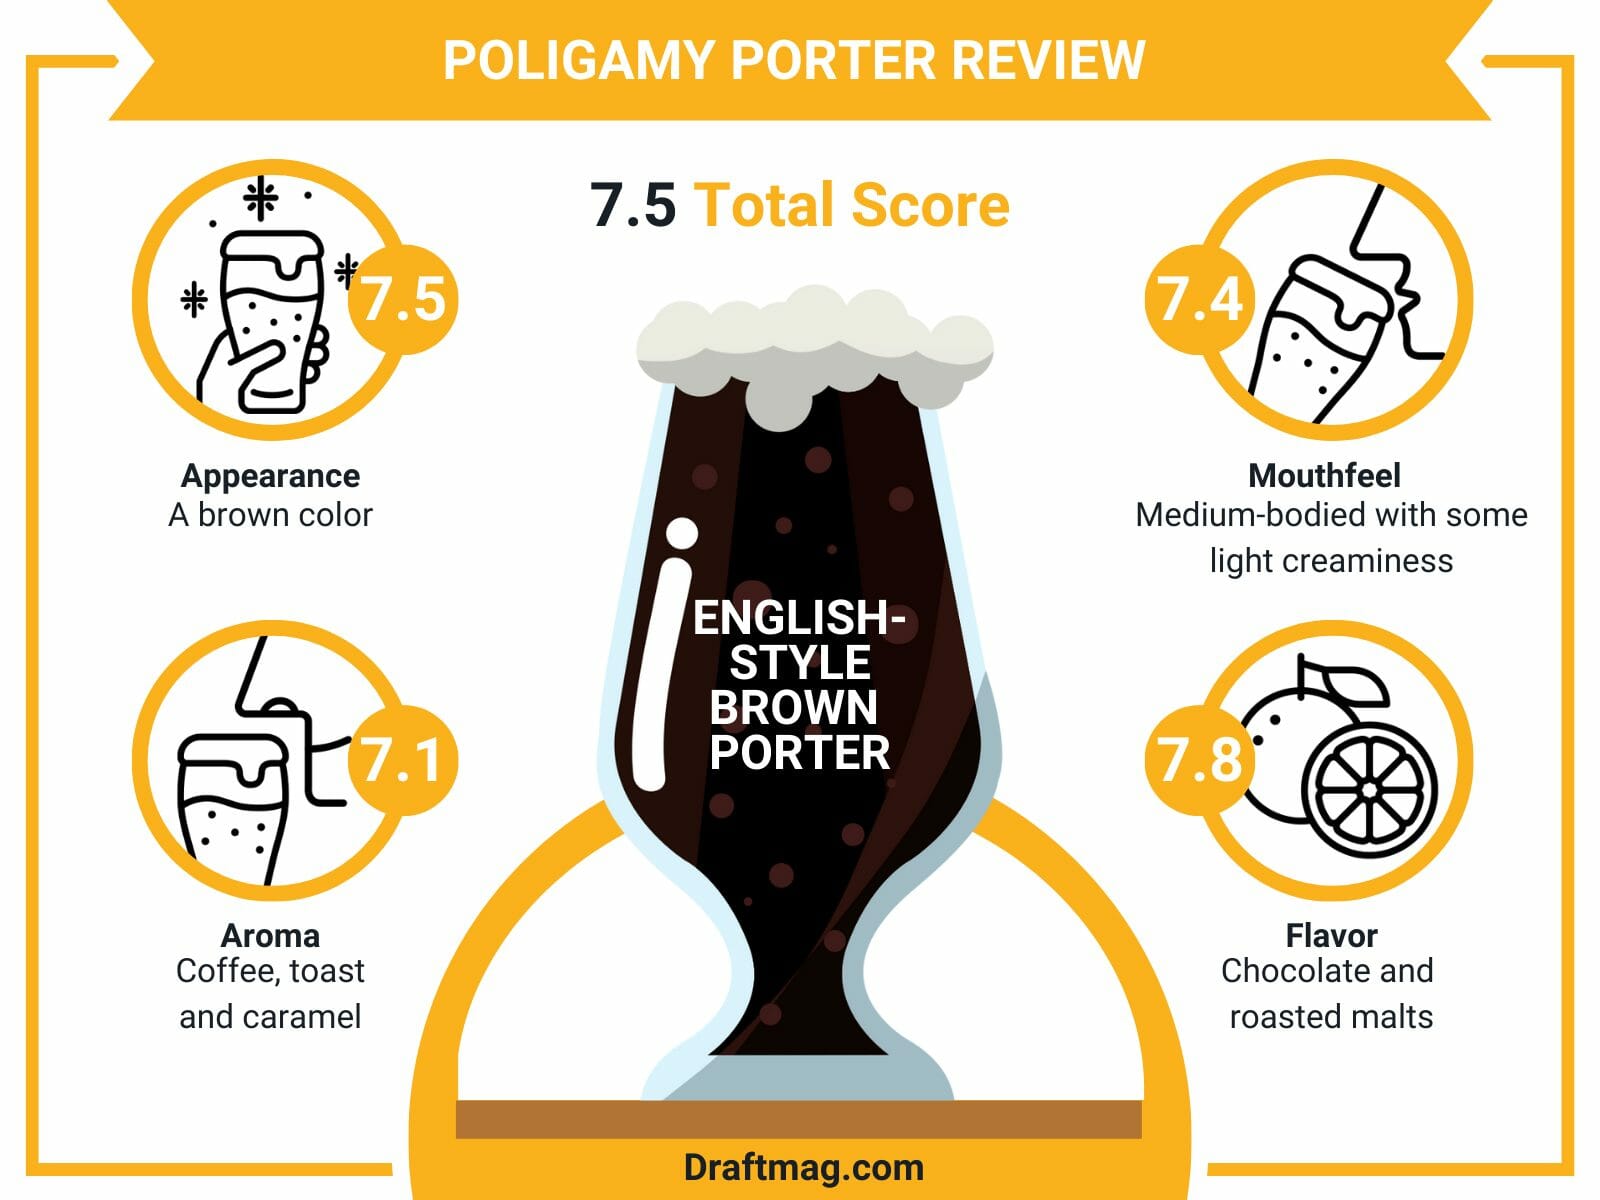 Poligamy porter review infographic